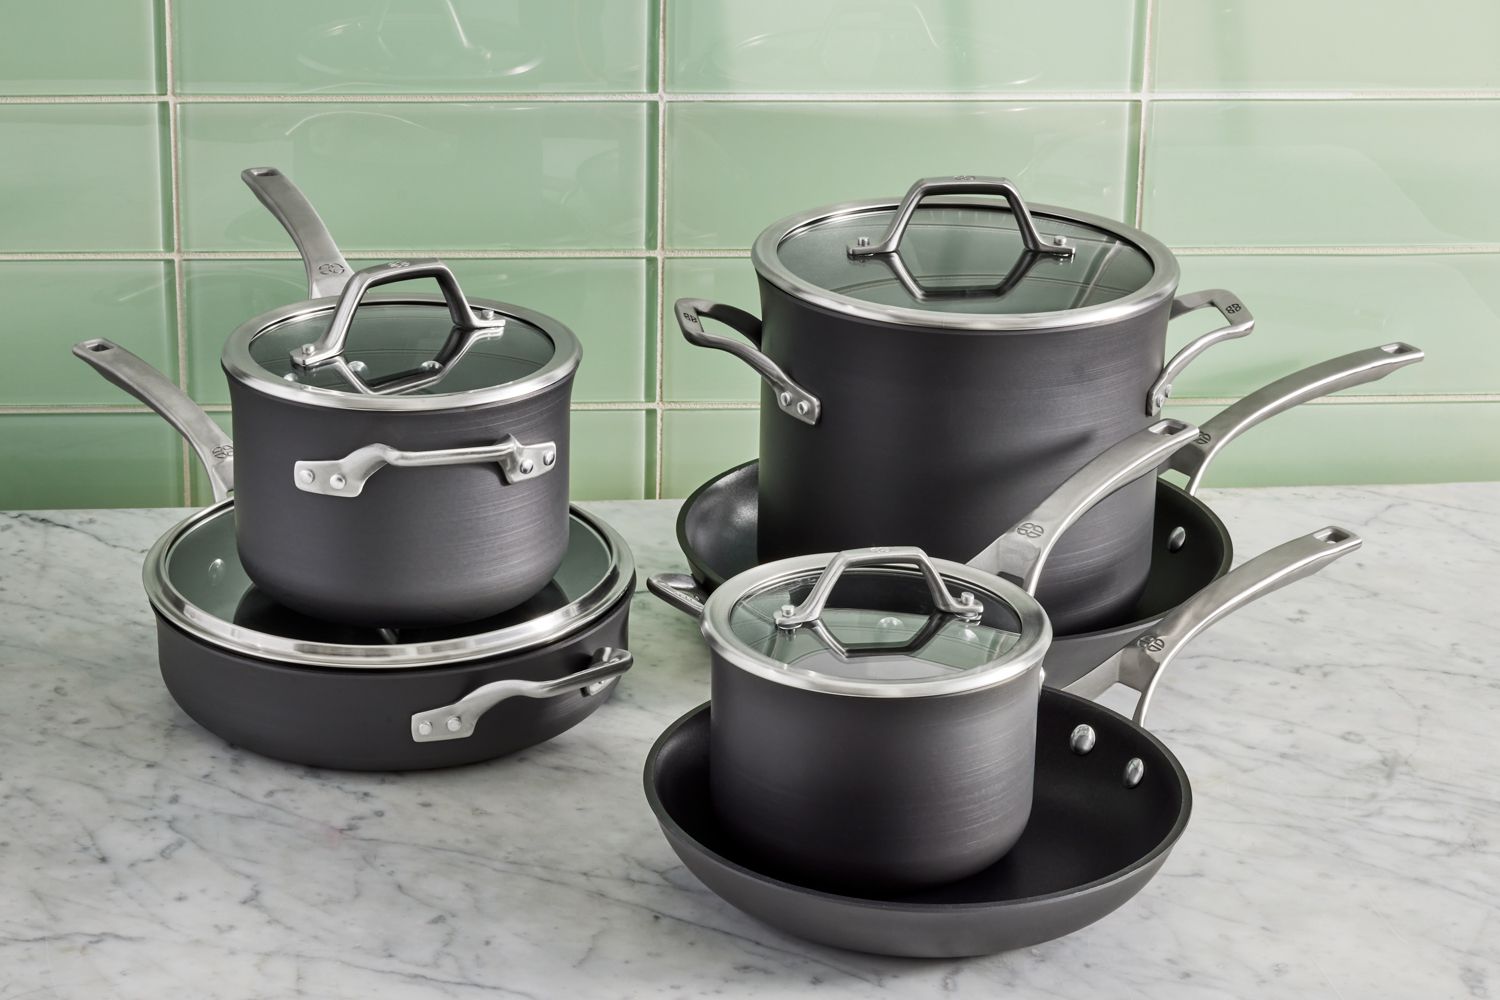 Nonstick cookware products